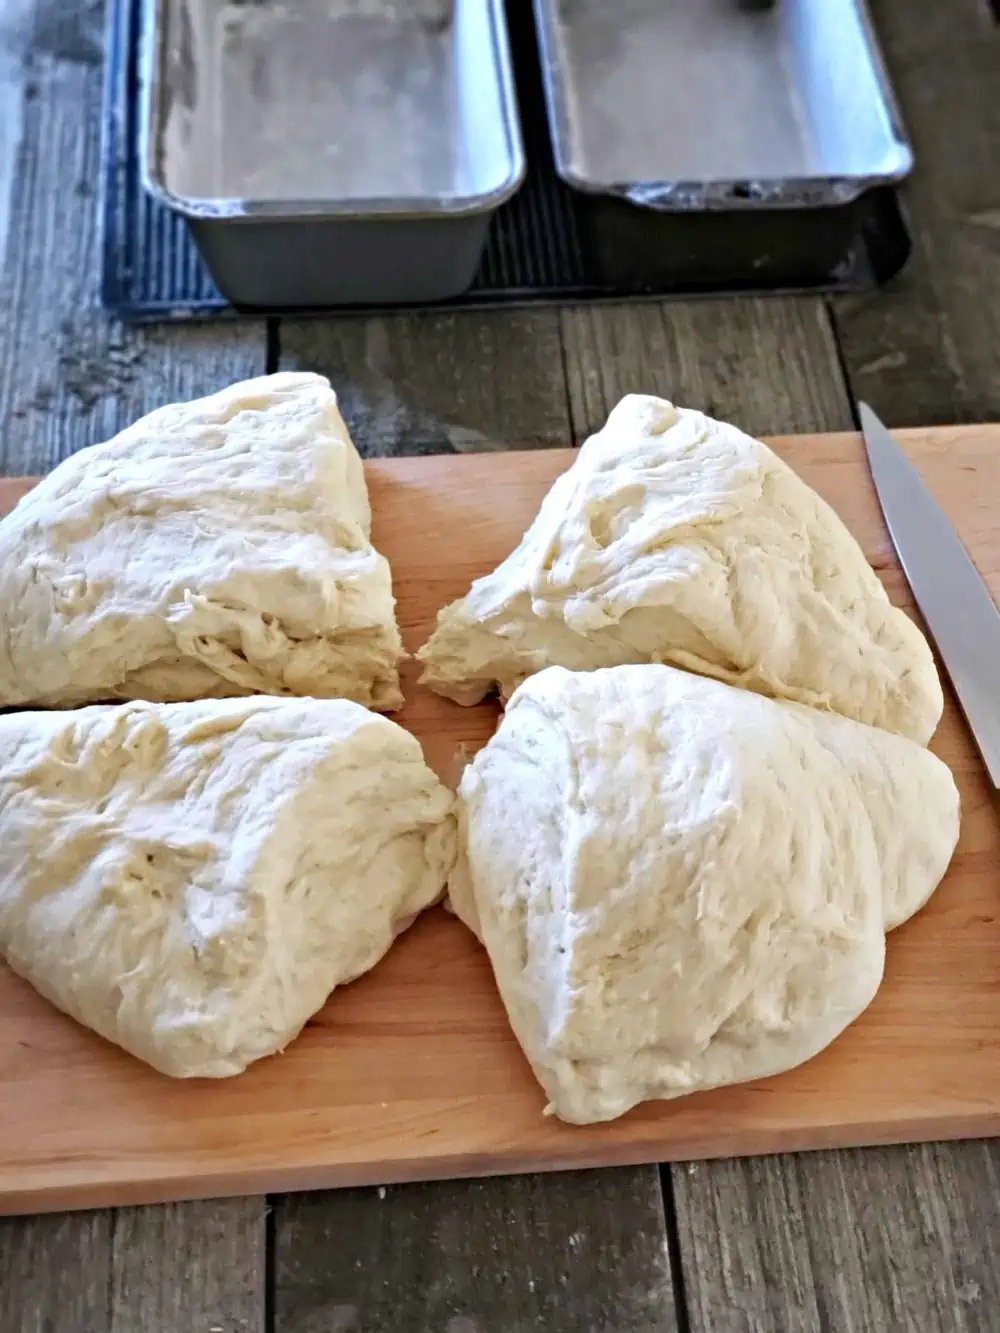 Split the dough in quarters and let rise again for 1 hour.